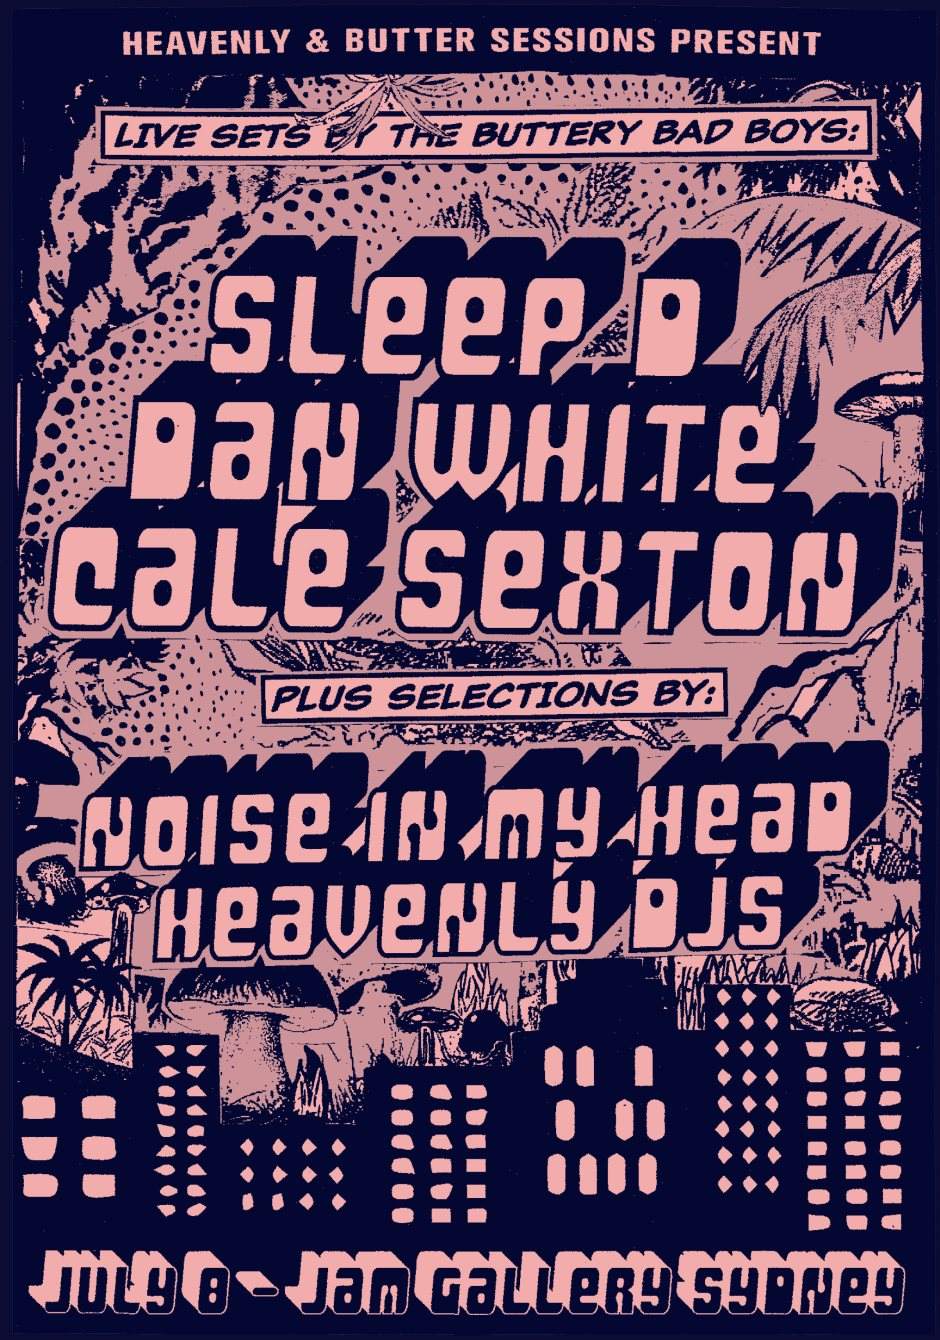 Heavenly & Butter Sessions present Sleep D, Dan White, Cale Sexton - Página trasera